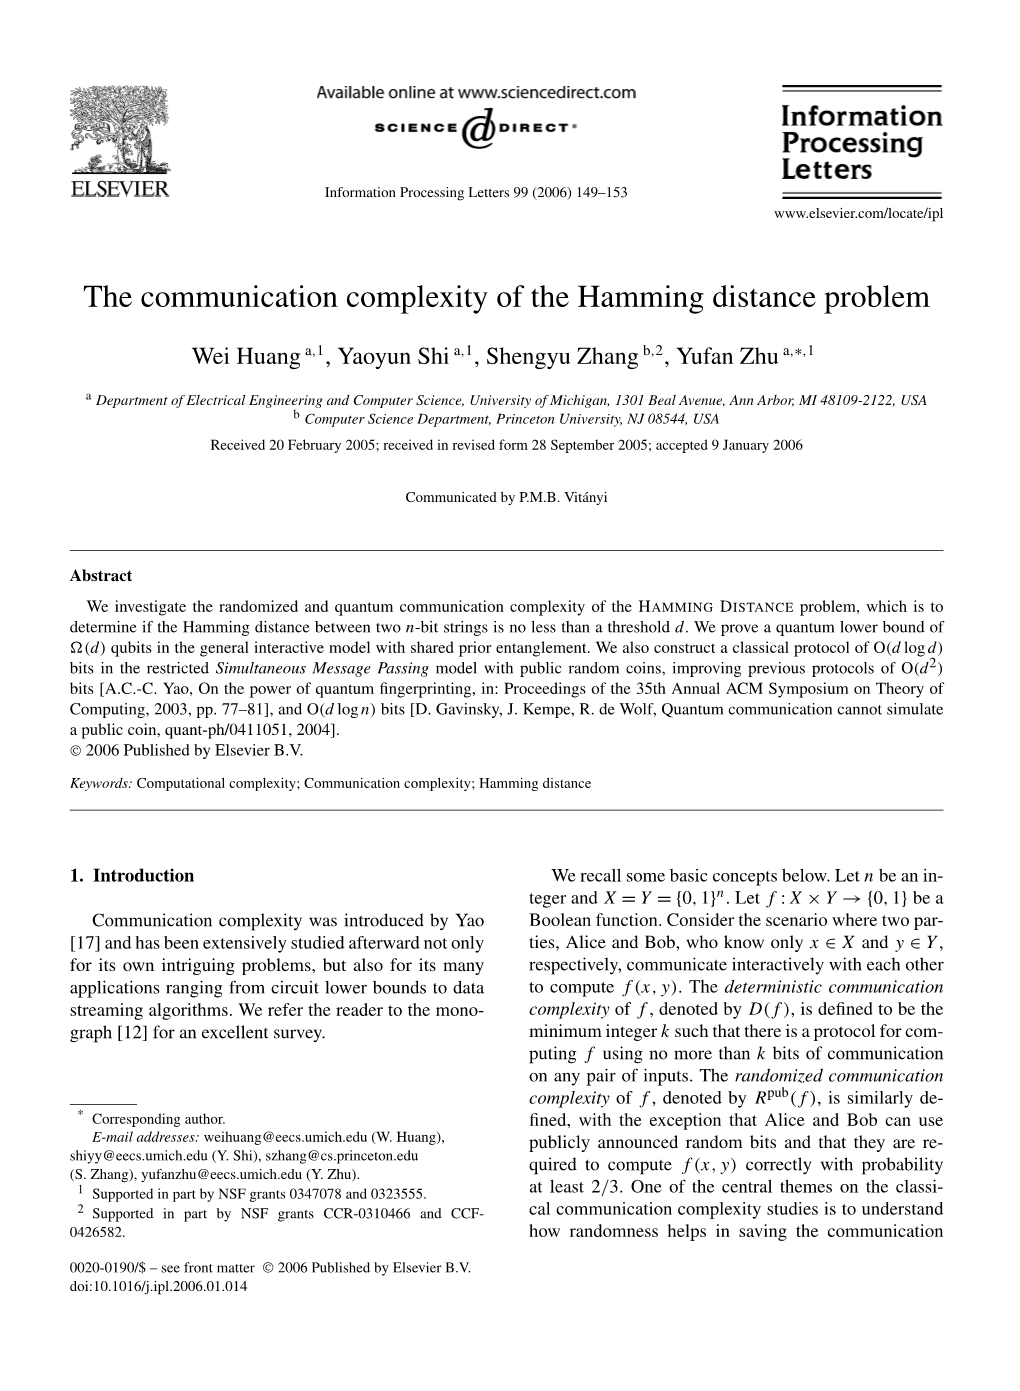 The Communication Complexity of the Hamming Distance Problem